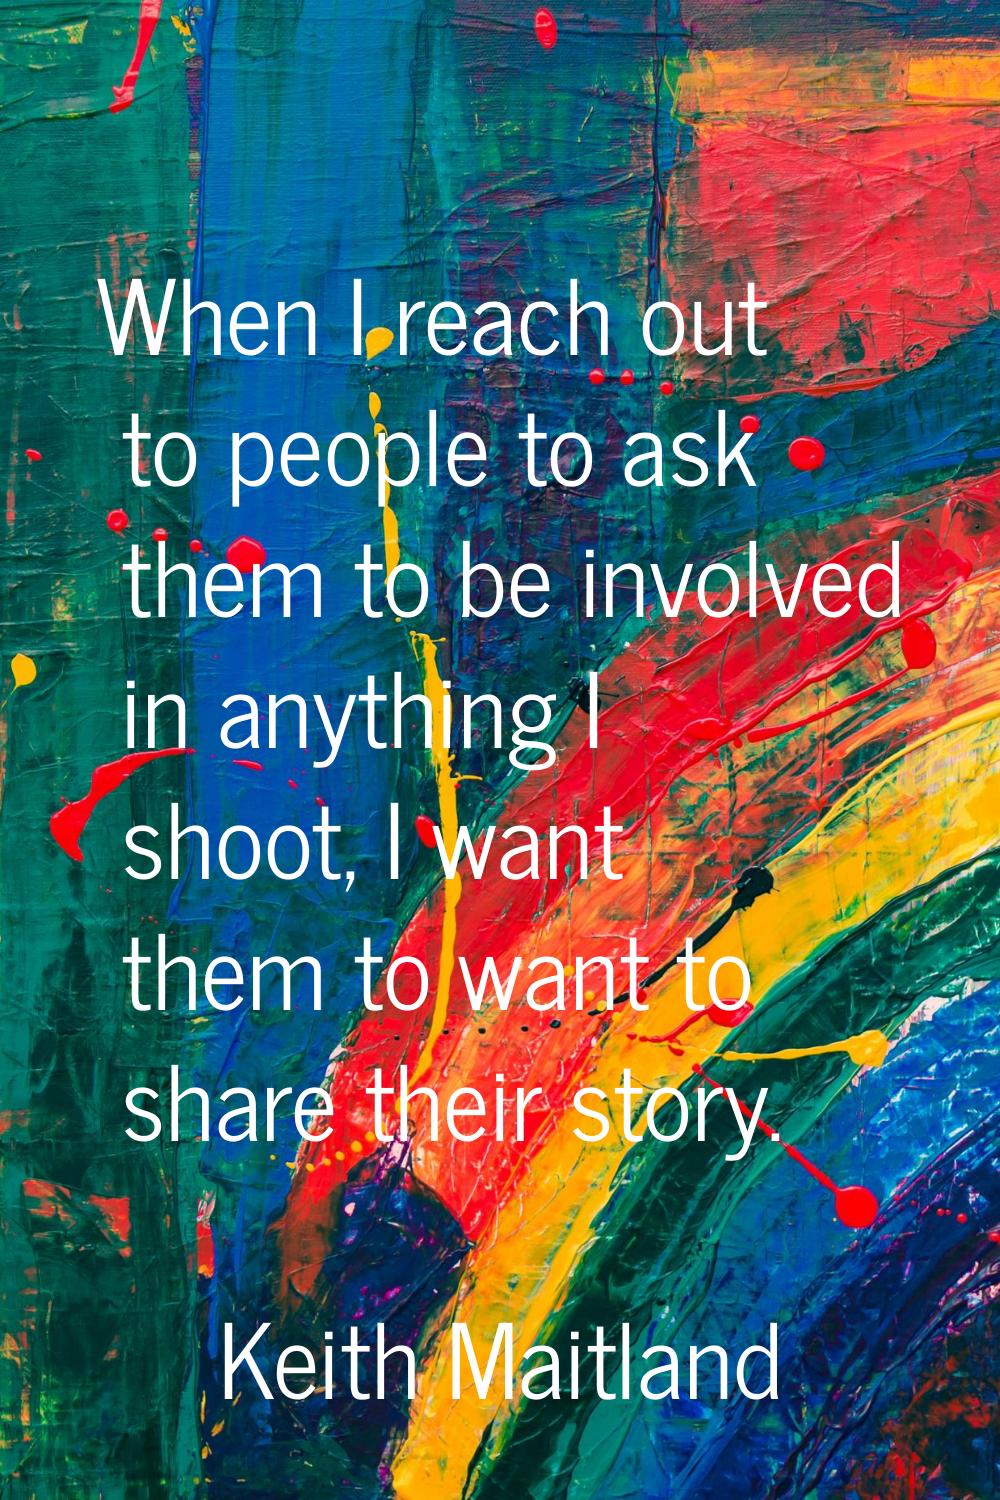 When I reach out to people to ask them to be involved in anything I shoot, I want them to want to s